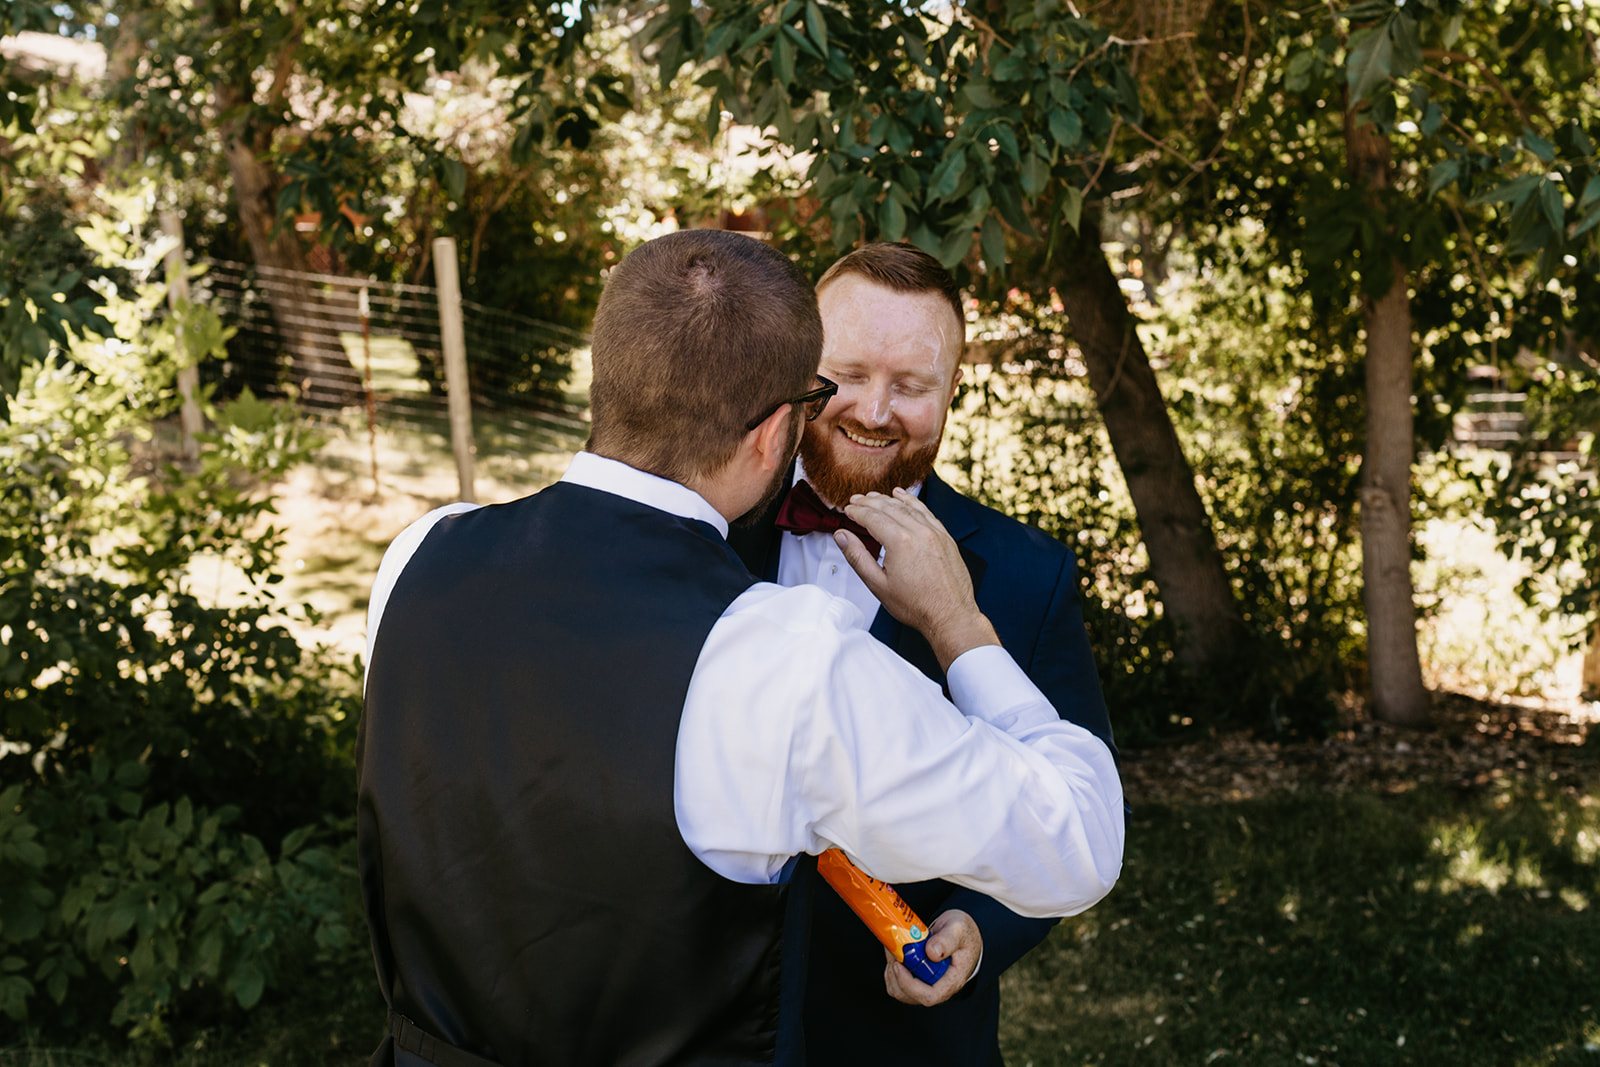 Grooms brother helps groom get ready for the wedding day